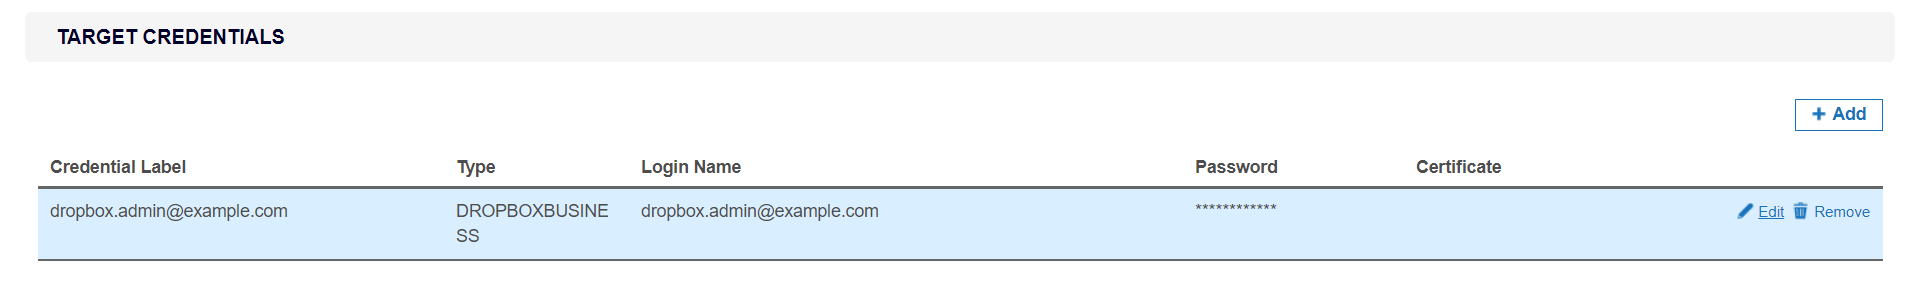 Example of a Dropbox Business credential set with Team Admin email "dropbox.admin@example.com".